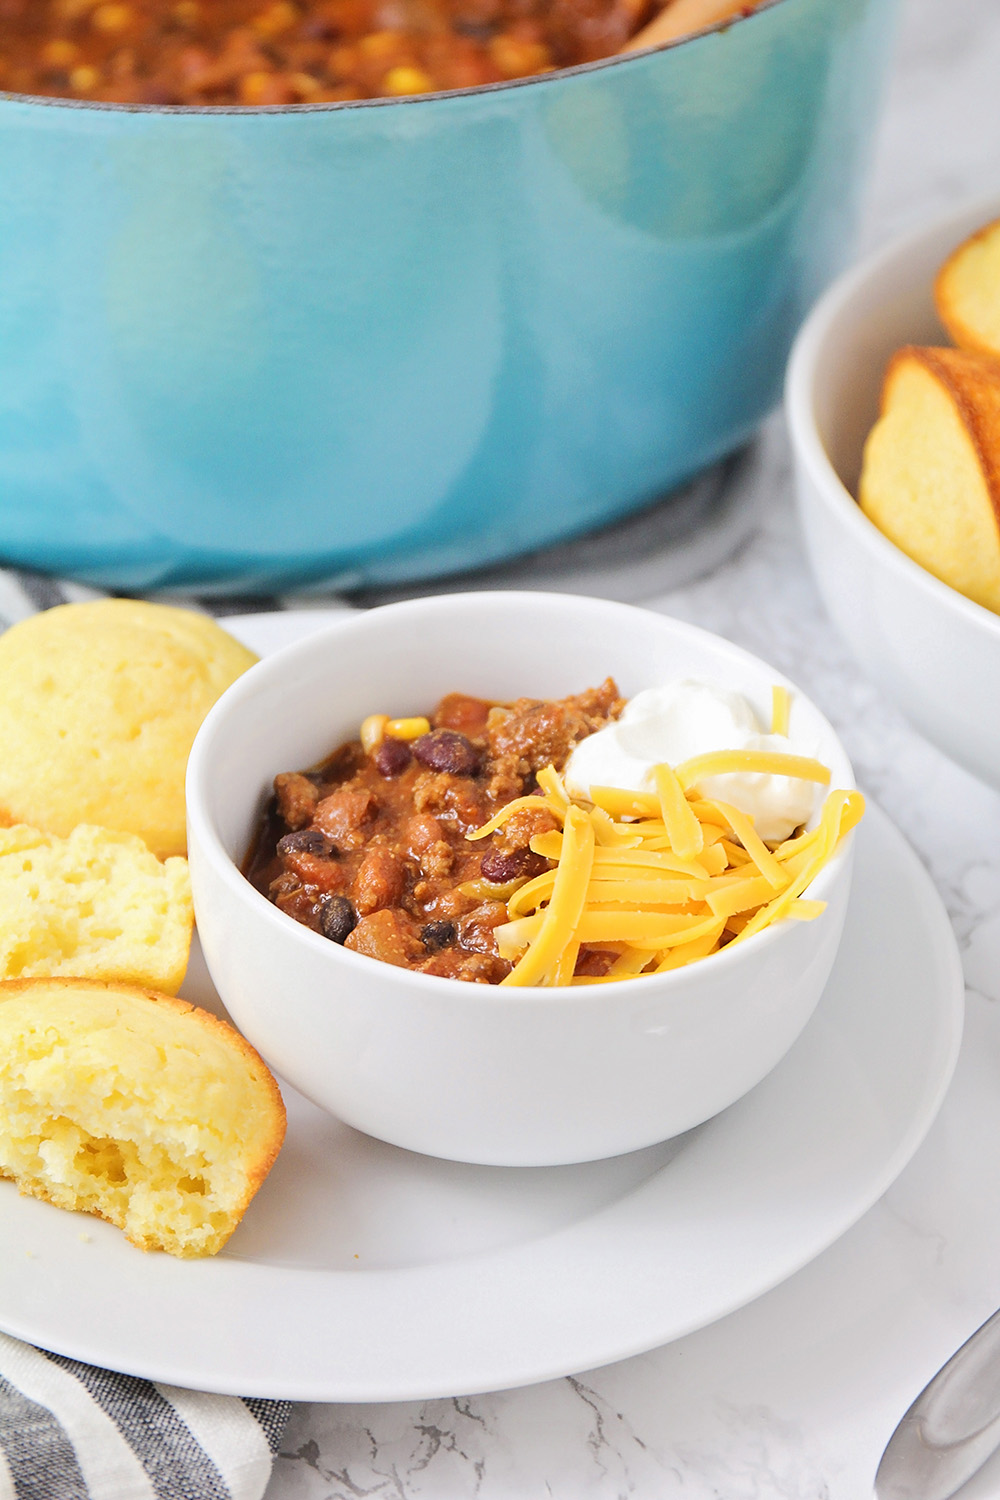 This rich and meaty stovetop chili is so easy to make, and full of delicious flavors!